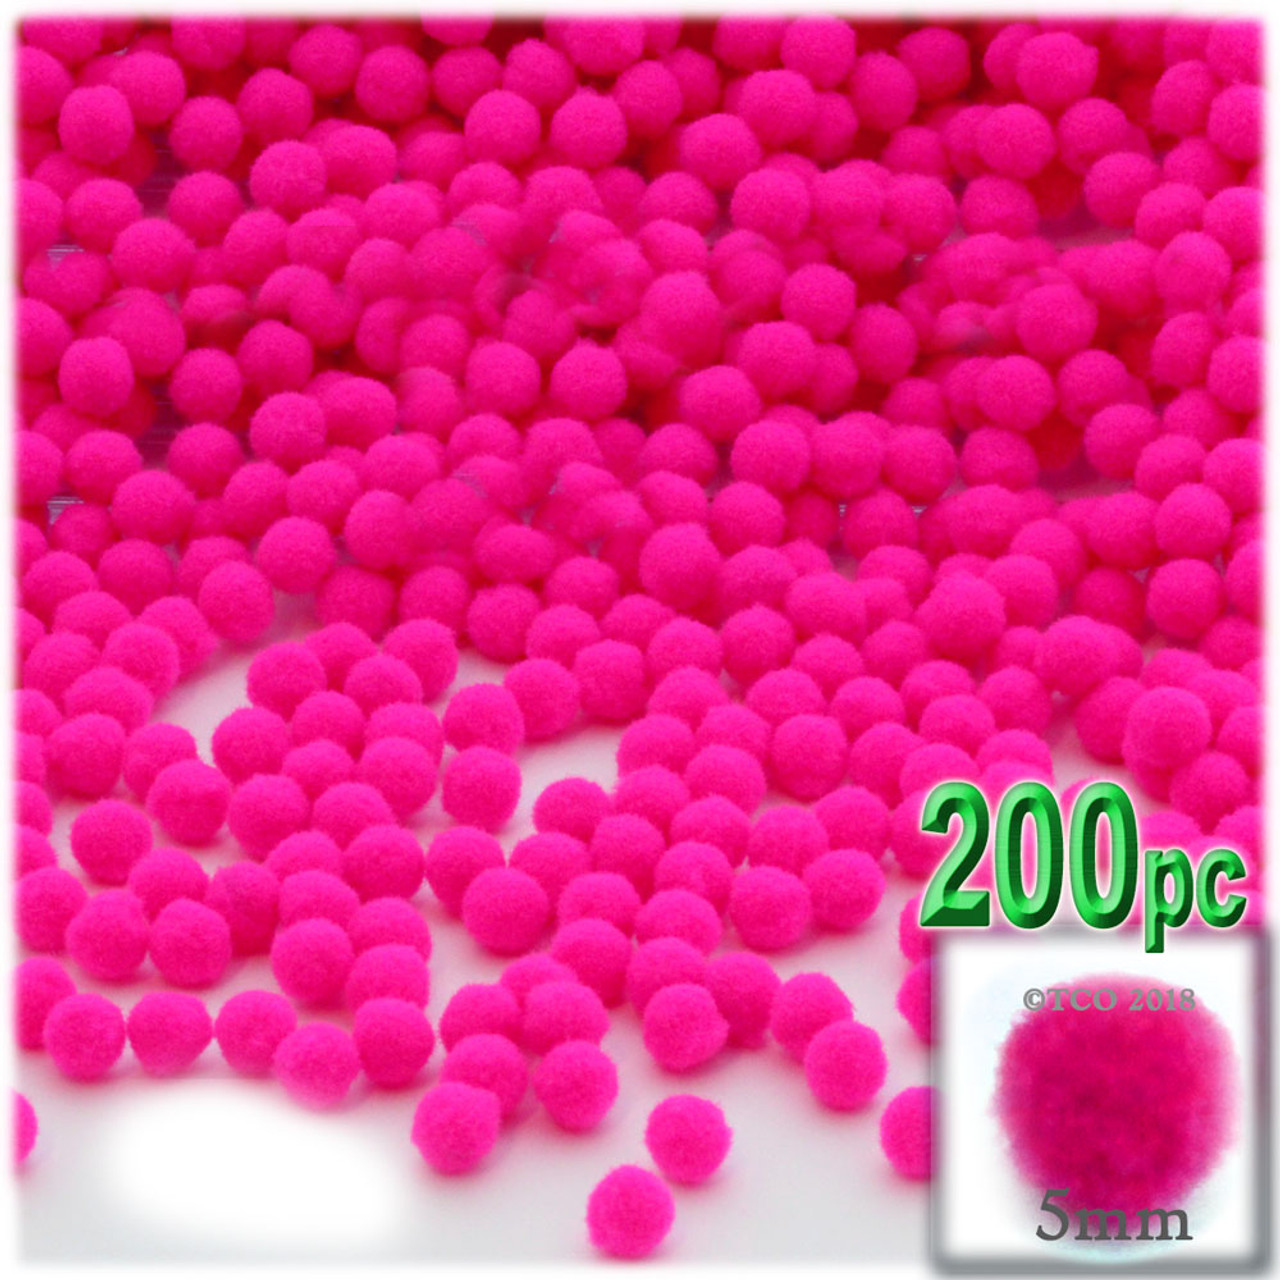 The Crafts Outlet 100-Piece Multi Purpose Pom Poms, Acrylic, 7mm/0.28-inch, Round, Pink